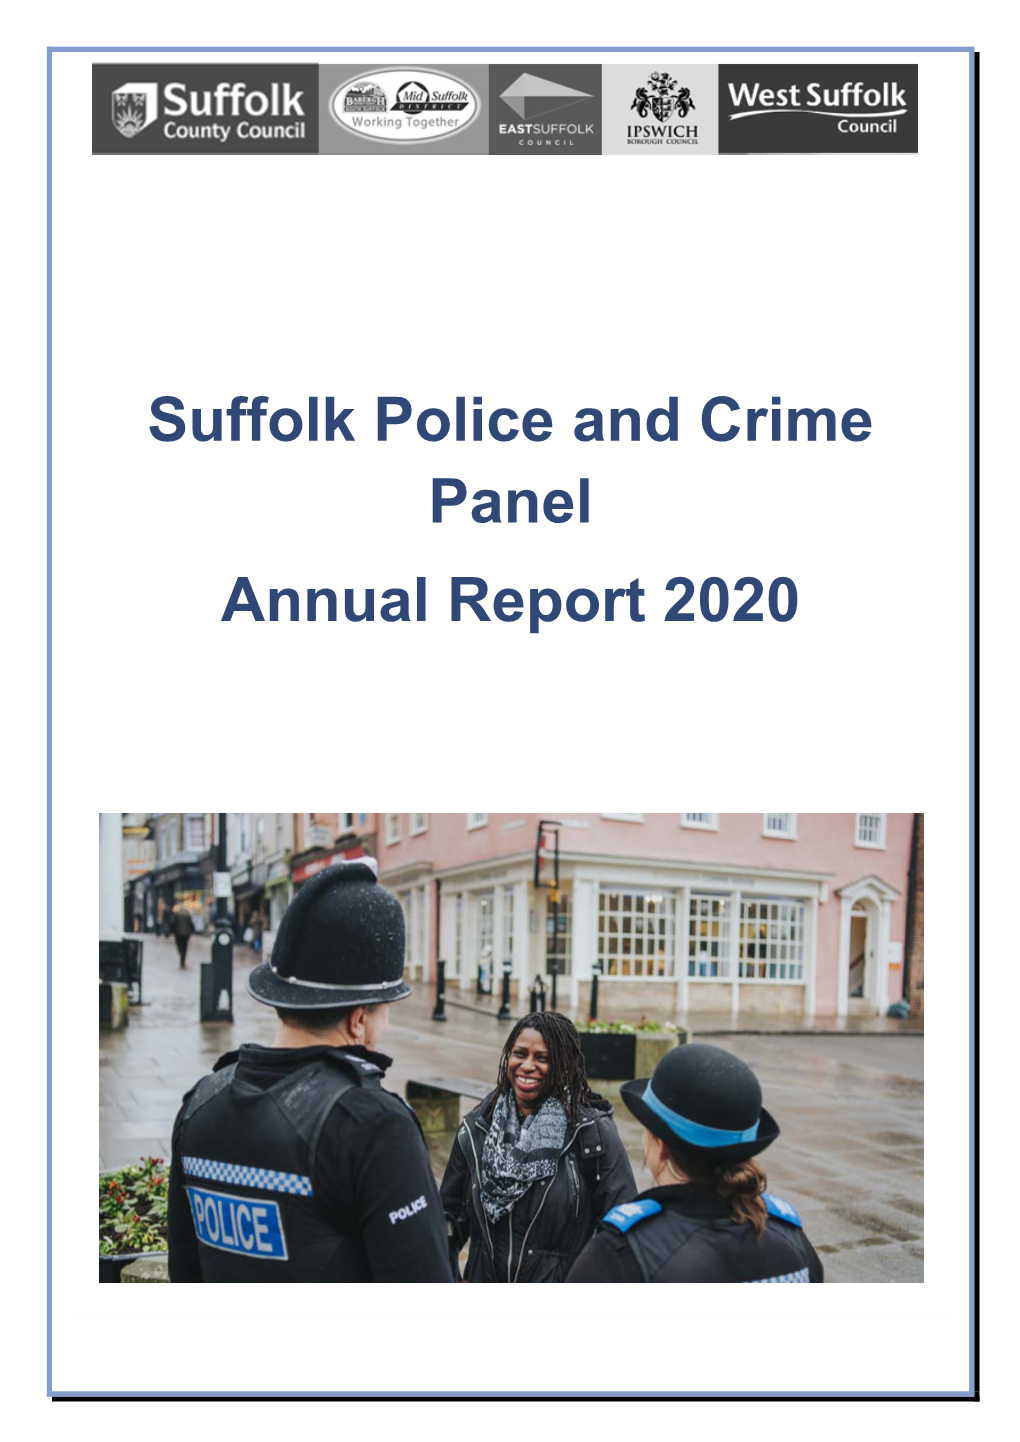 Suffolk Police and Crime Panel Annual Report 2020